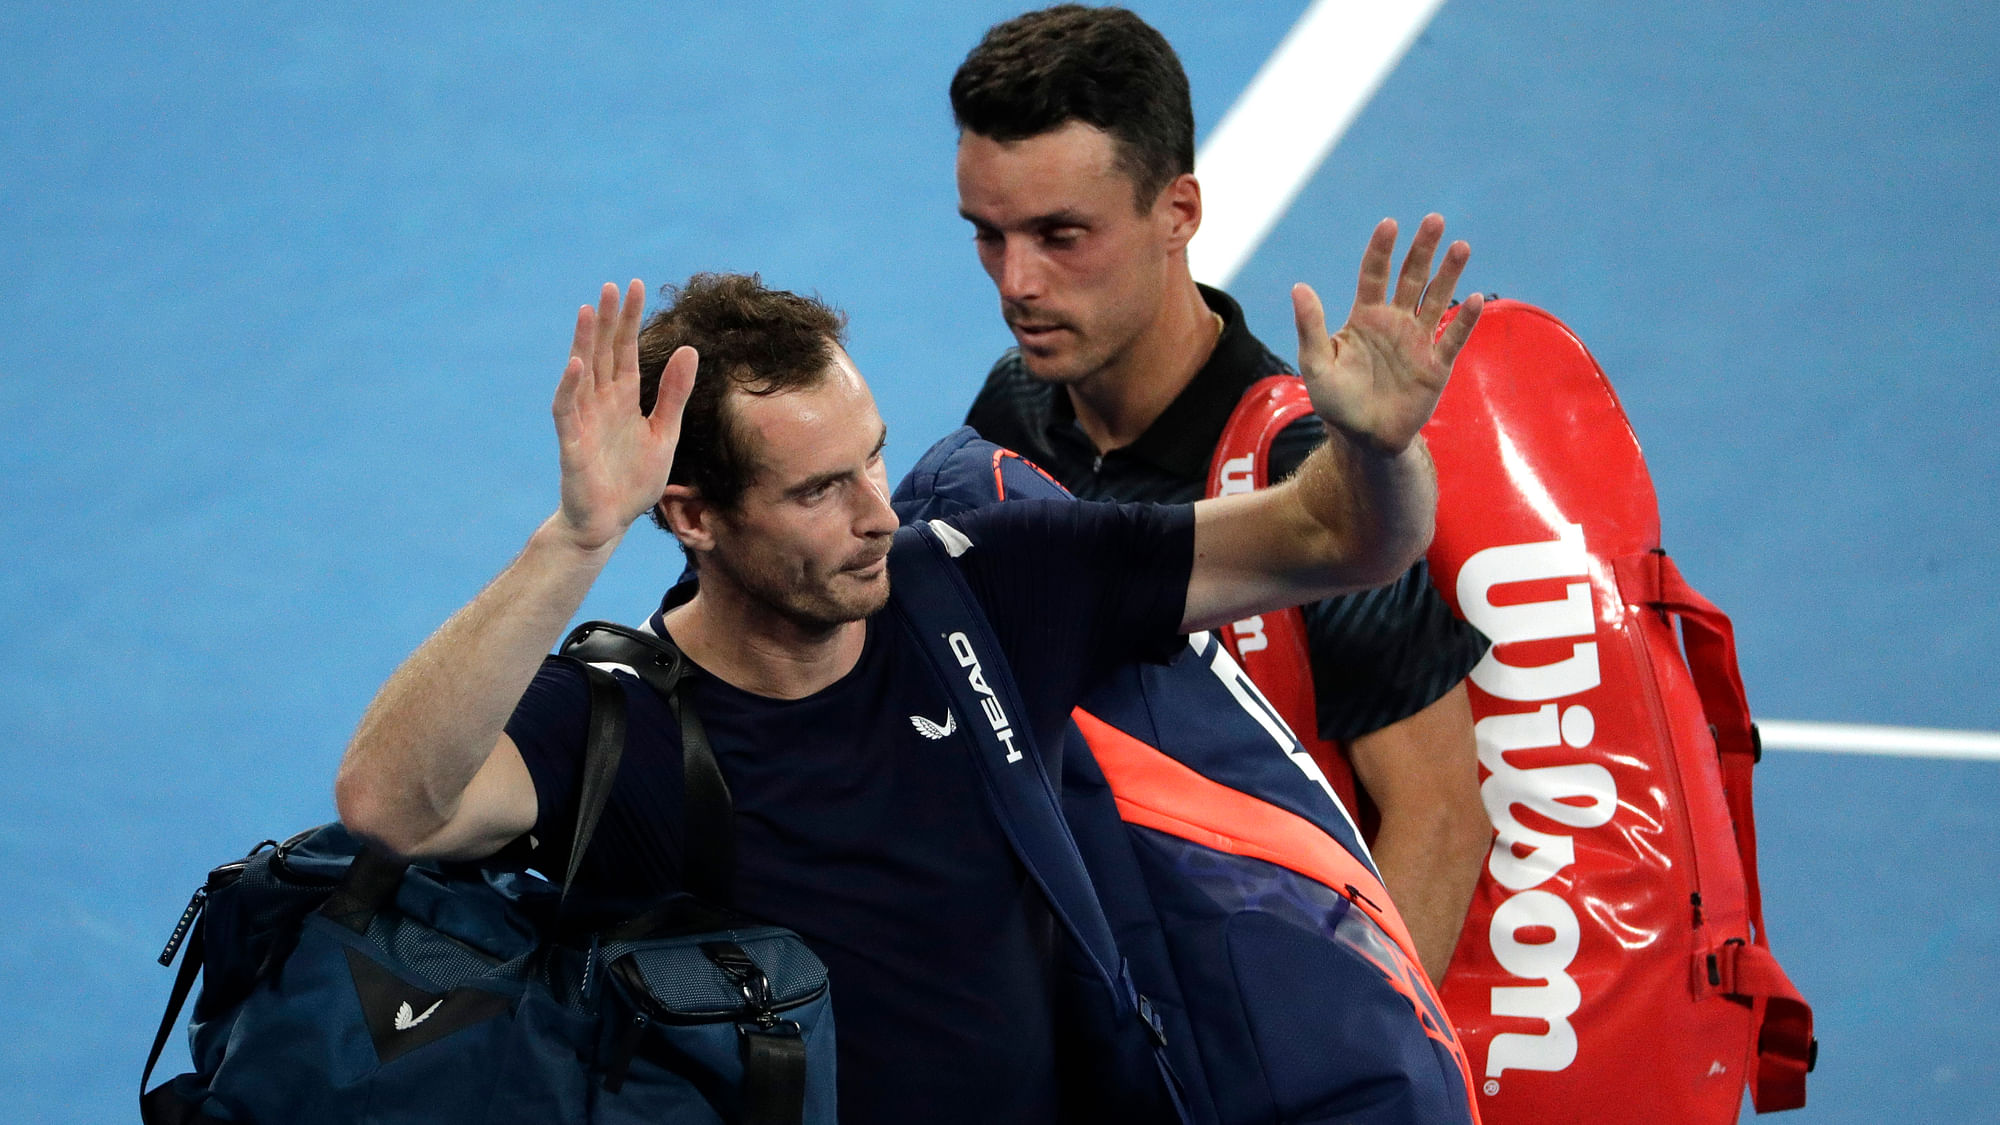 Britain’s Andy Murray, left, waves as he leaves the court following his first round loss to Spain’s Roberto Bautista Agut, right, at the Australian Open tennis championships in Melbourne, Australia, Monday, Jan. 14, 2019.&nbsp;